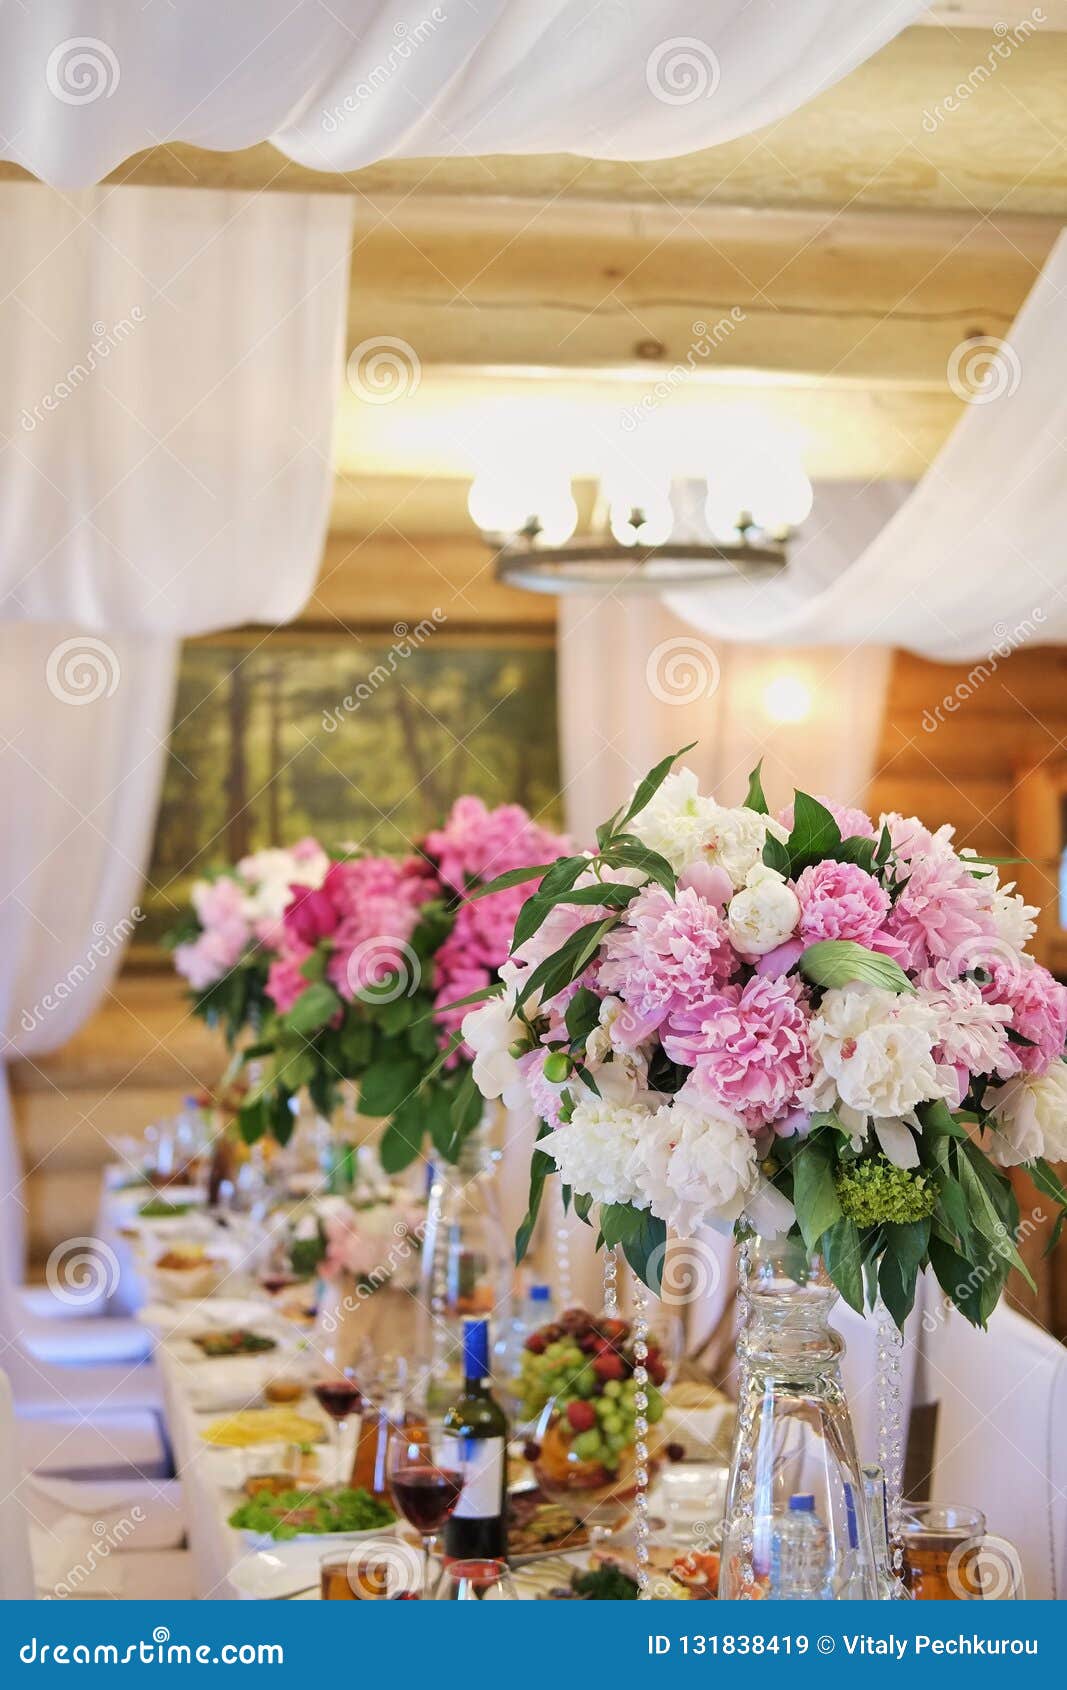 Wedding Decoration Of The Holiday Table Of White And Pink